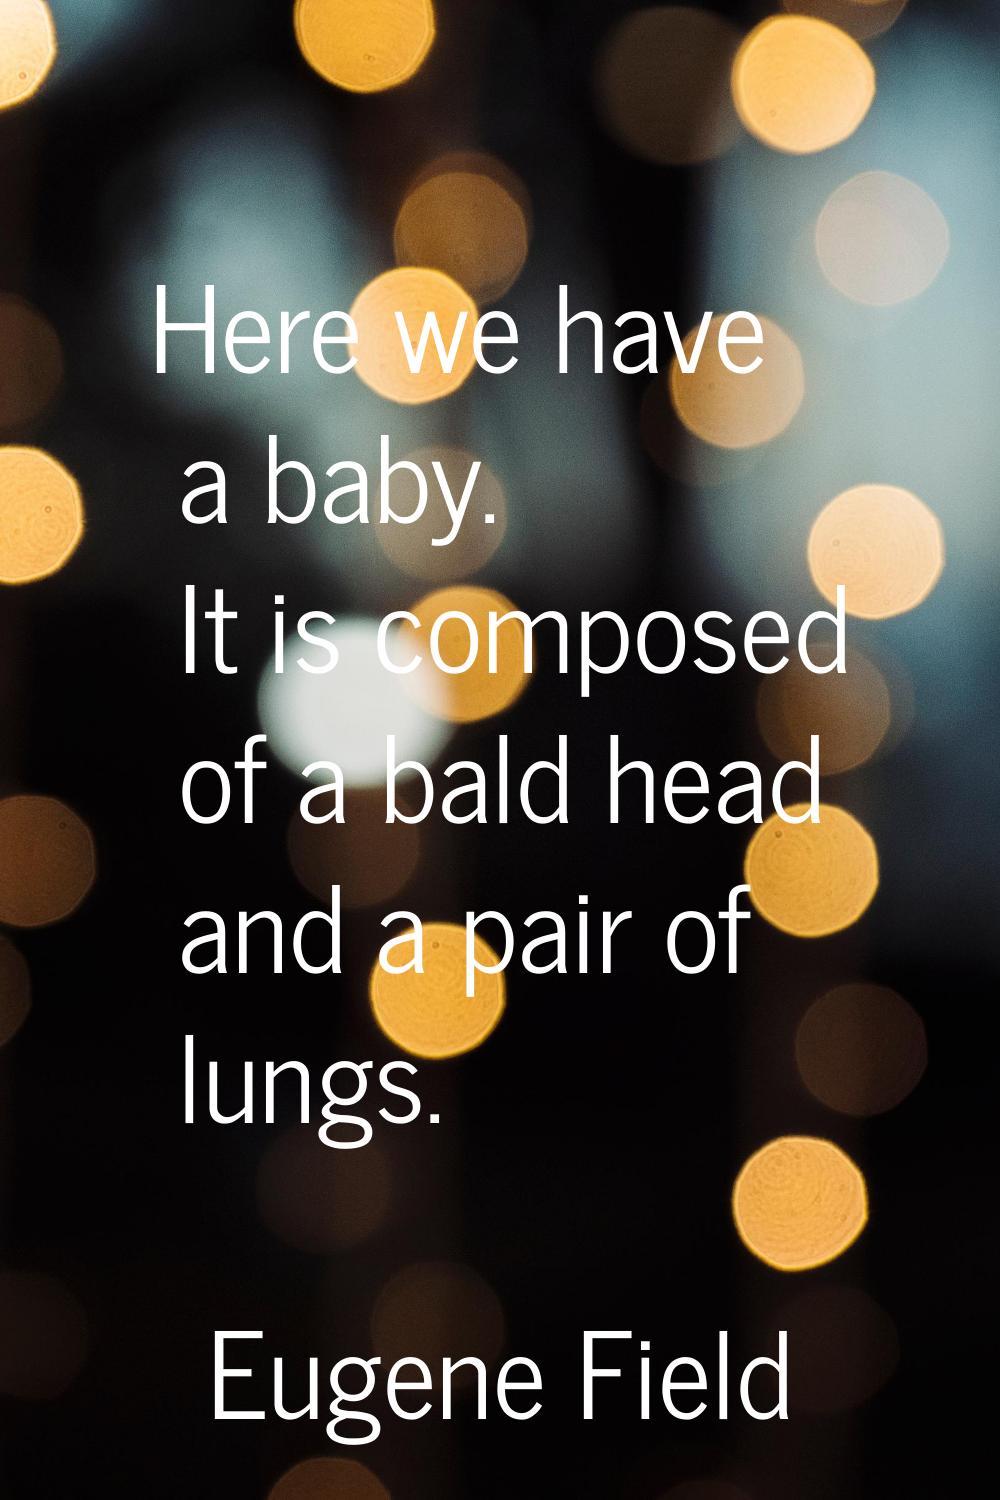 Here we have a baby. It is composed of a bald head and a pair of lungs.